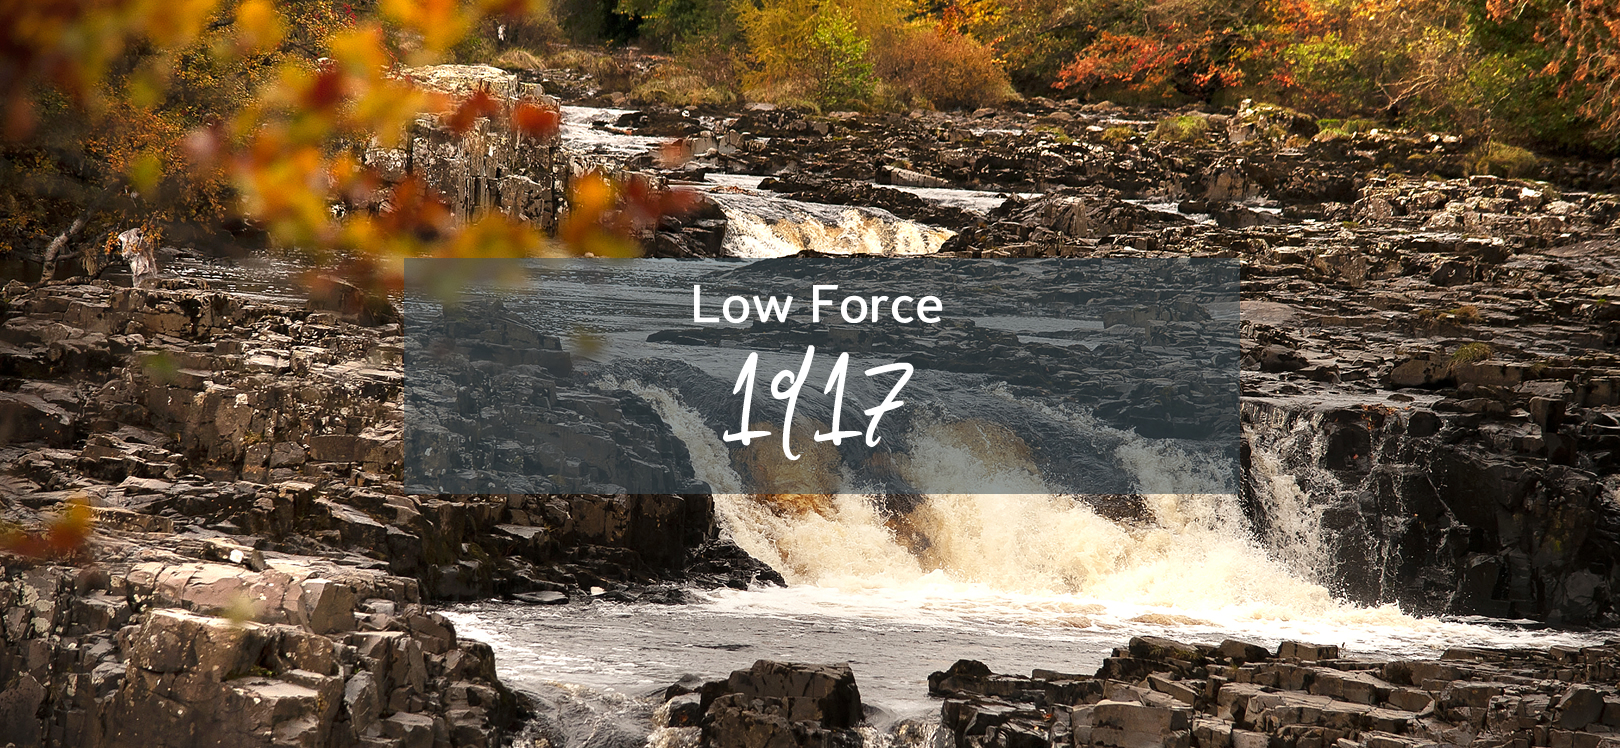 Low Force 1917